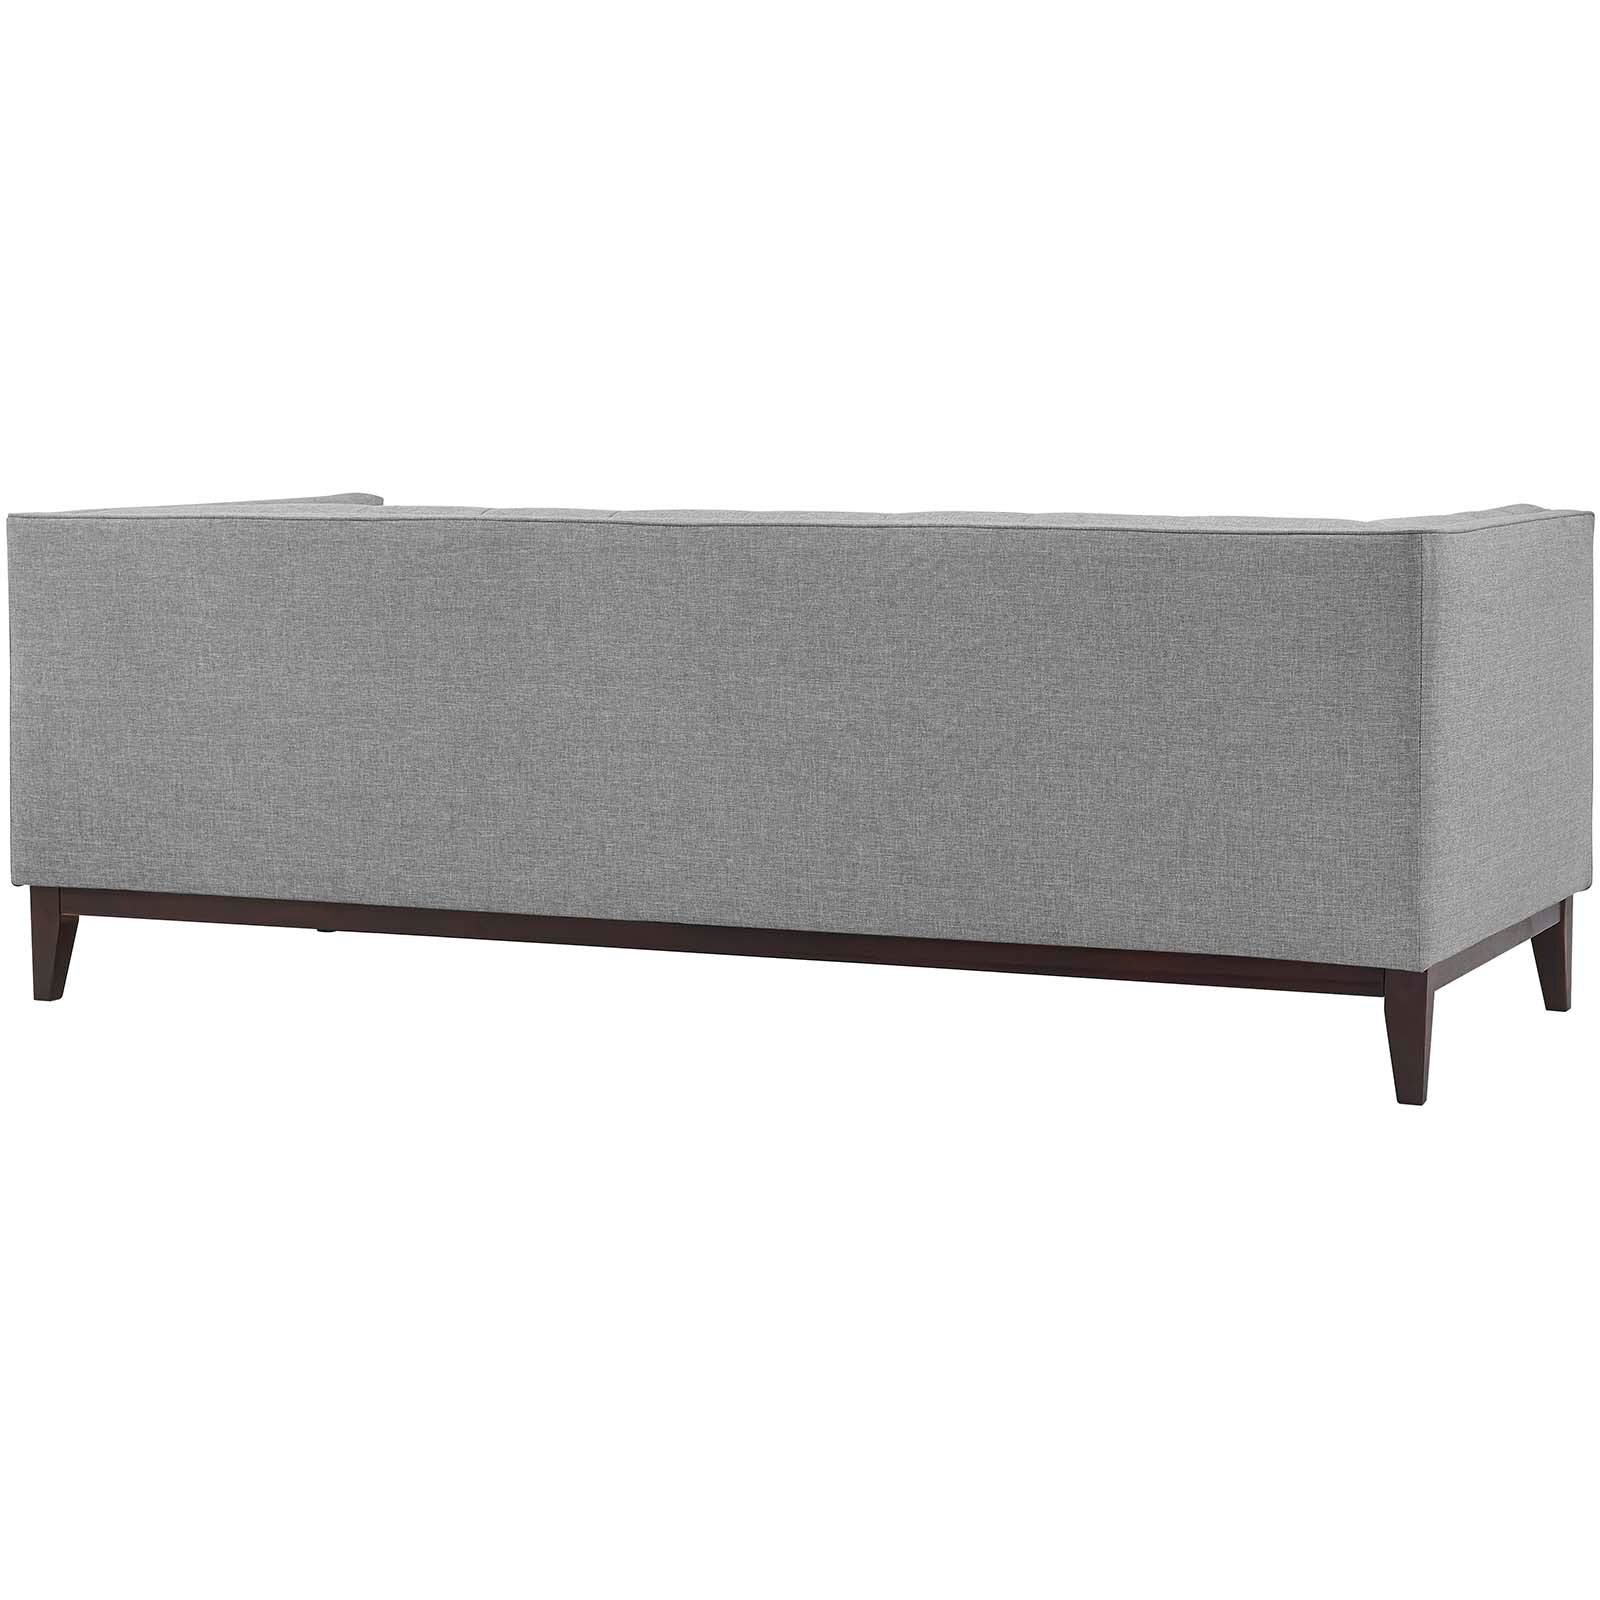 Modway Sofas & Couches - Serve Upholstered Fabric Sofa Light Gray